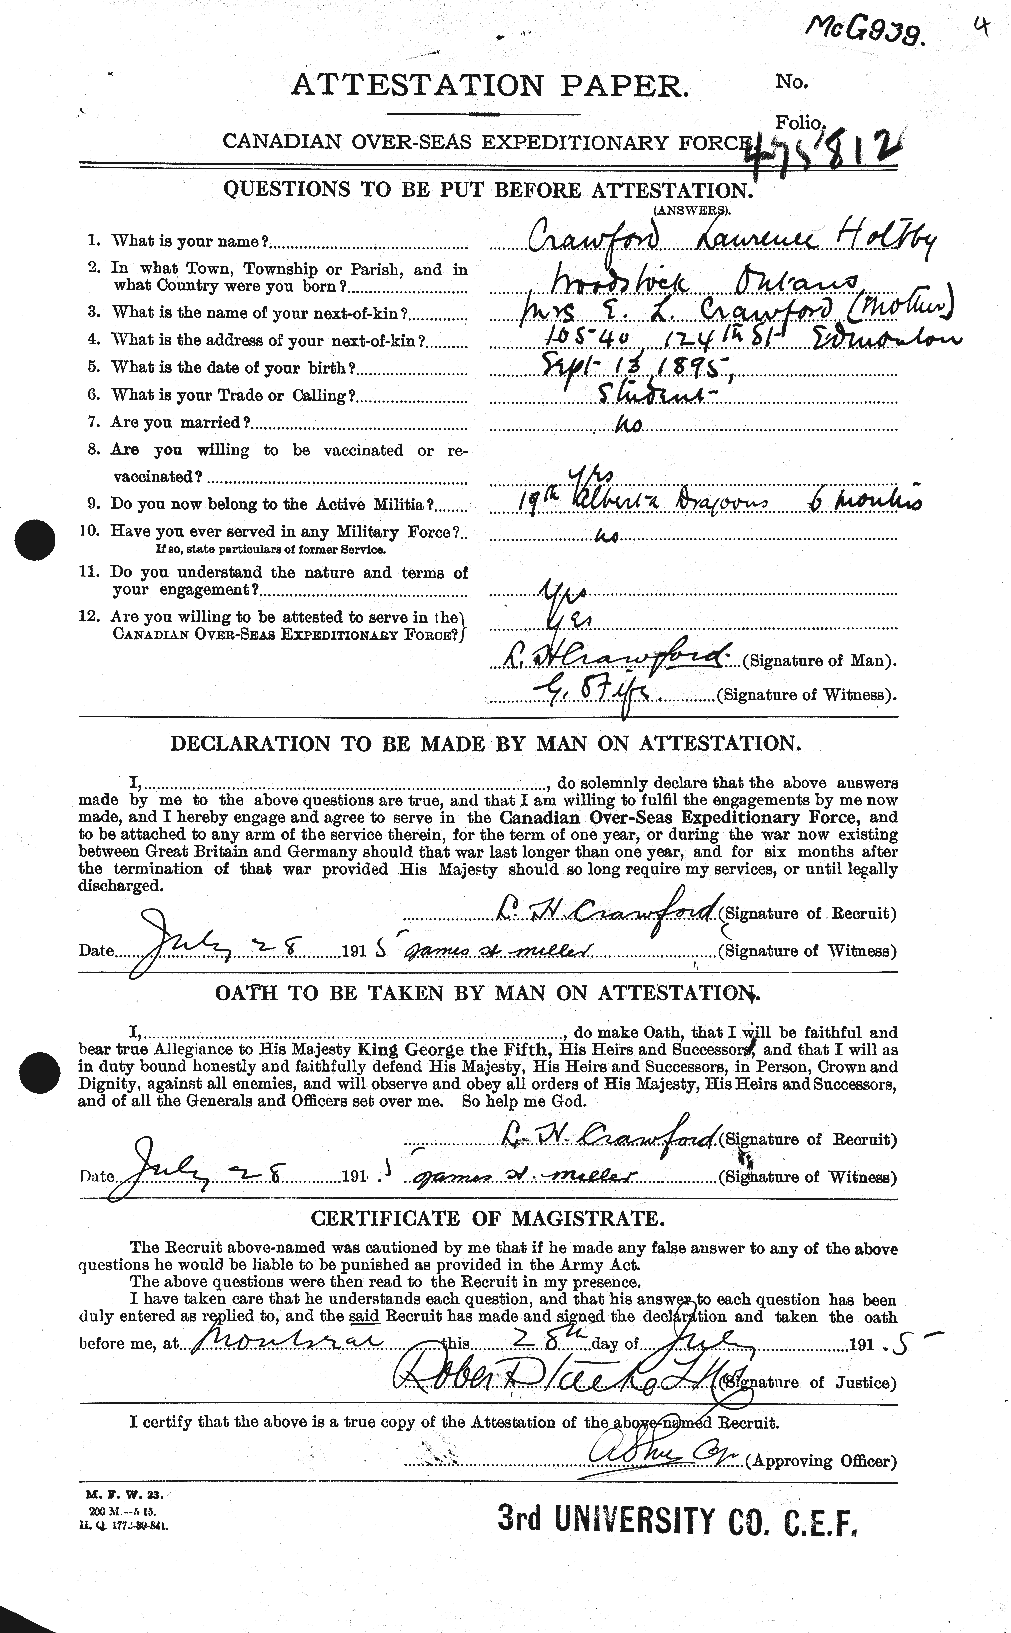 Personnel Records of the First World War - CEF 061802a